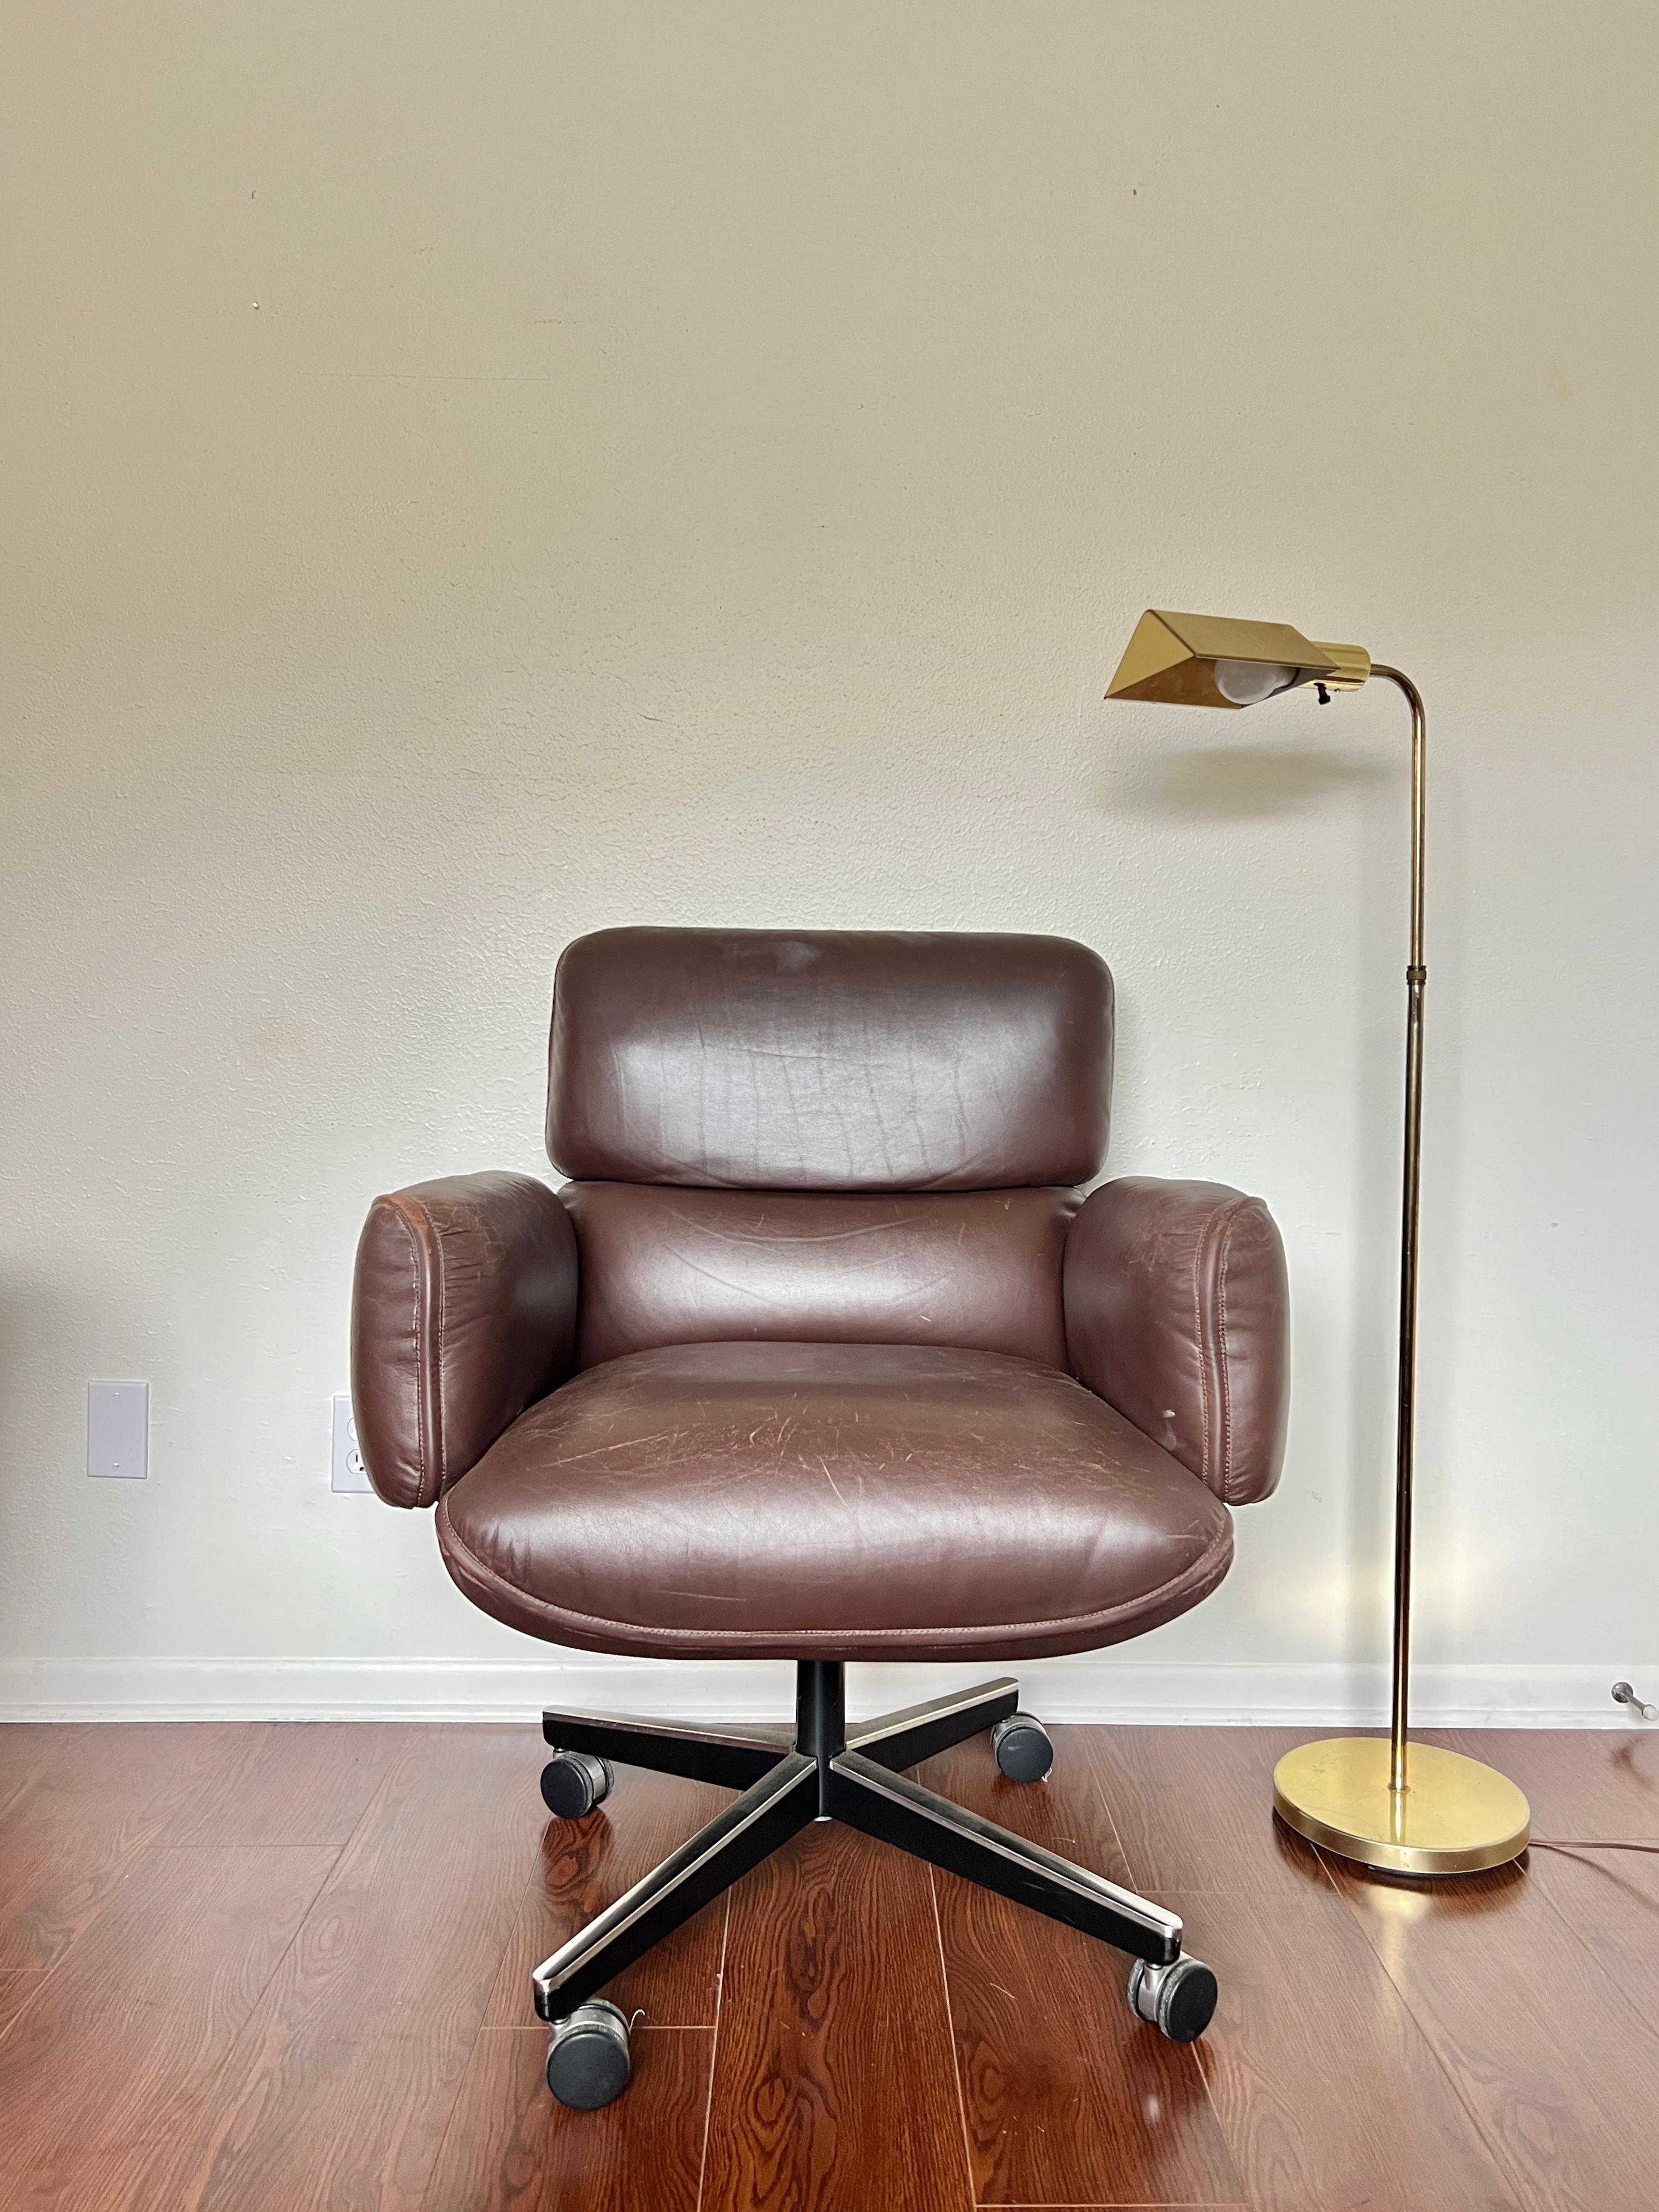 A gorgeous leather desk chair by Otto Zapf for Knoll International, circa 1970s with knoll tag still attached. Constructed of cushioned sections, with the top head section and arms removable. The chair base is height and tilt / recline adjustable